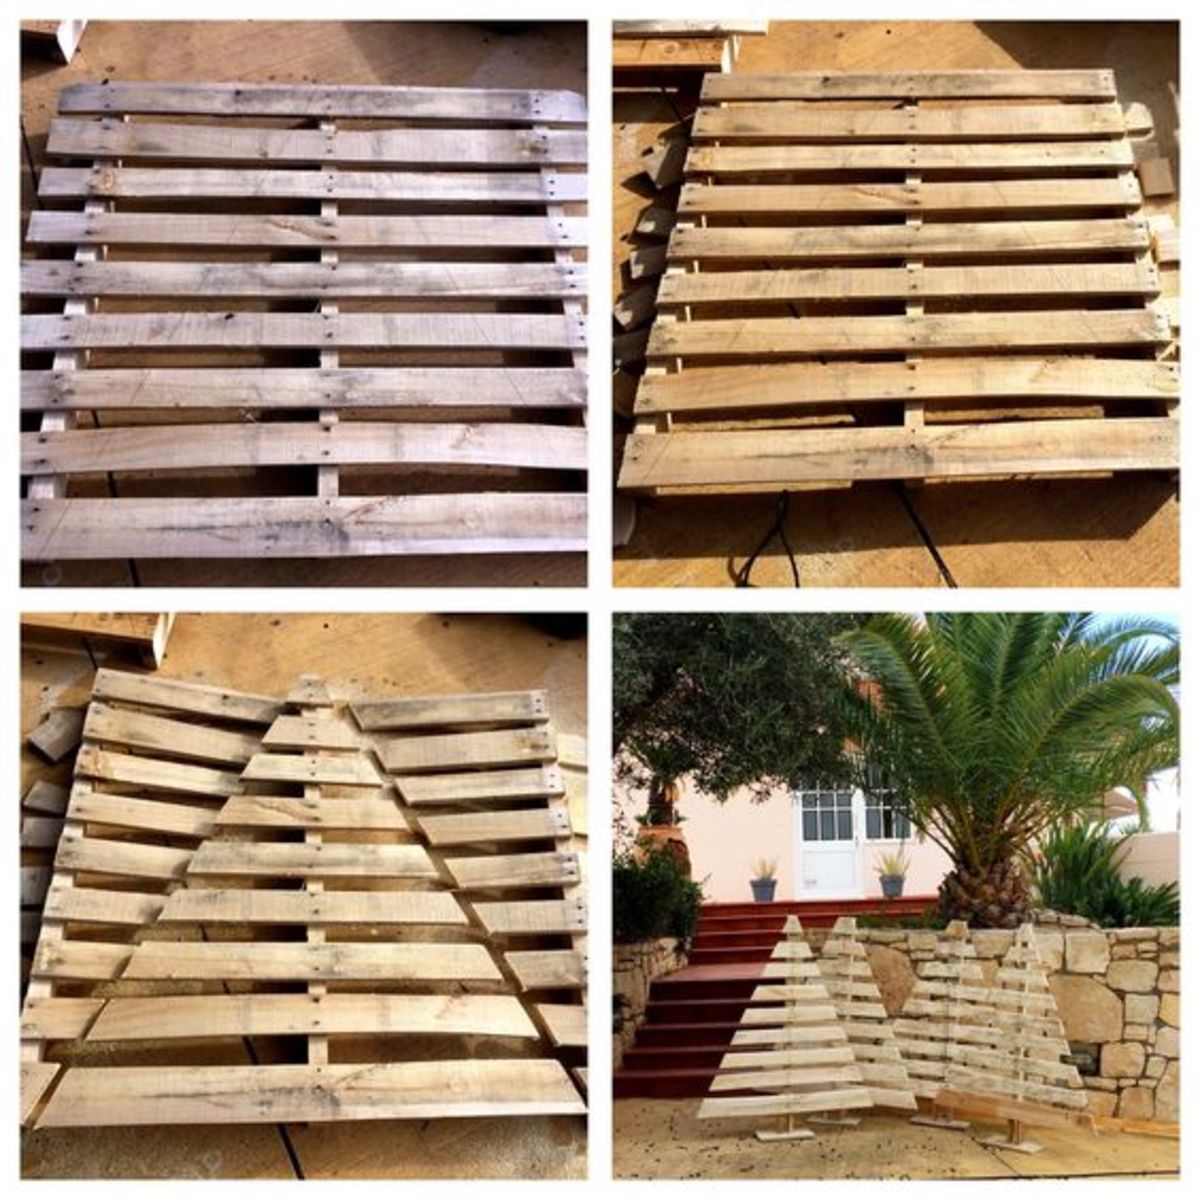 Here are some photo instructions for creating a cut pallet tree.